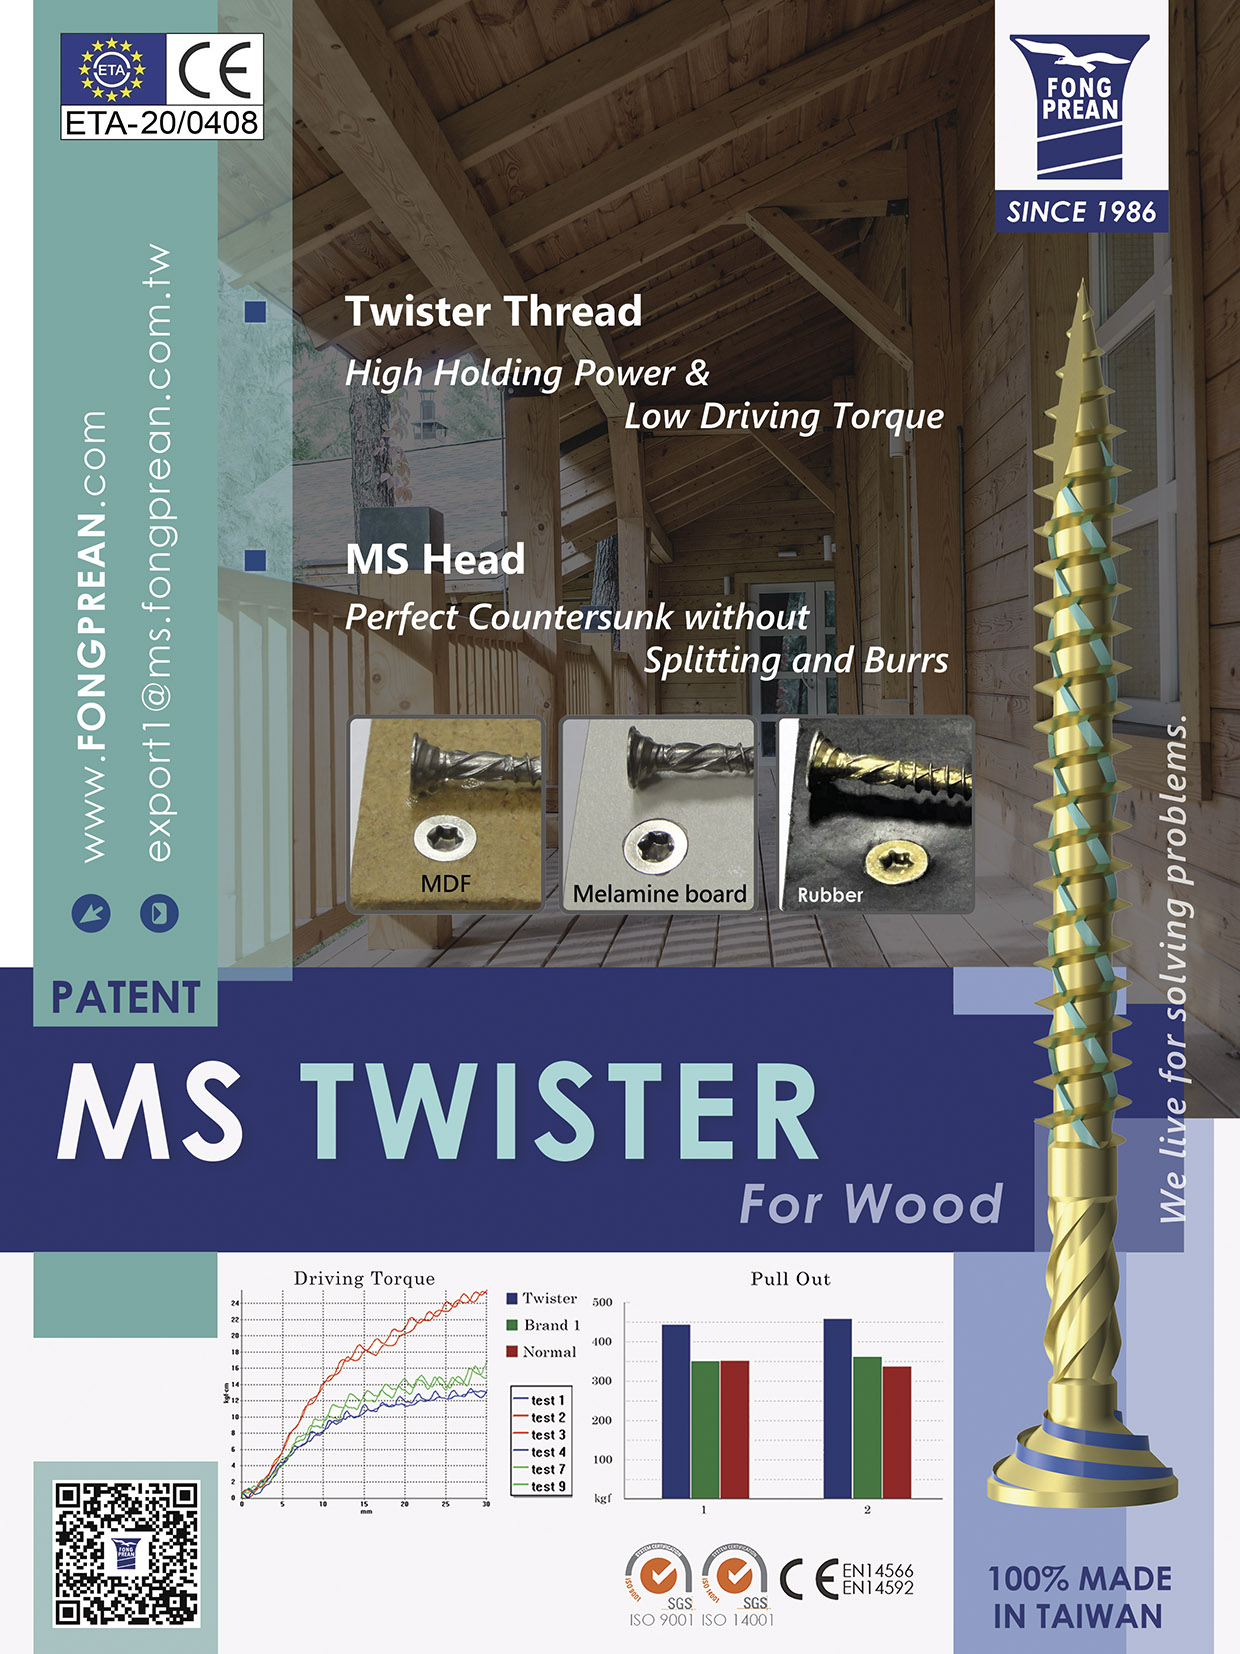 FONG PREAN INDUSTRIAL CO., LTD. , MS Twister Patent for Soft Wood